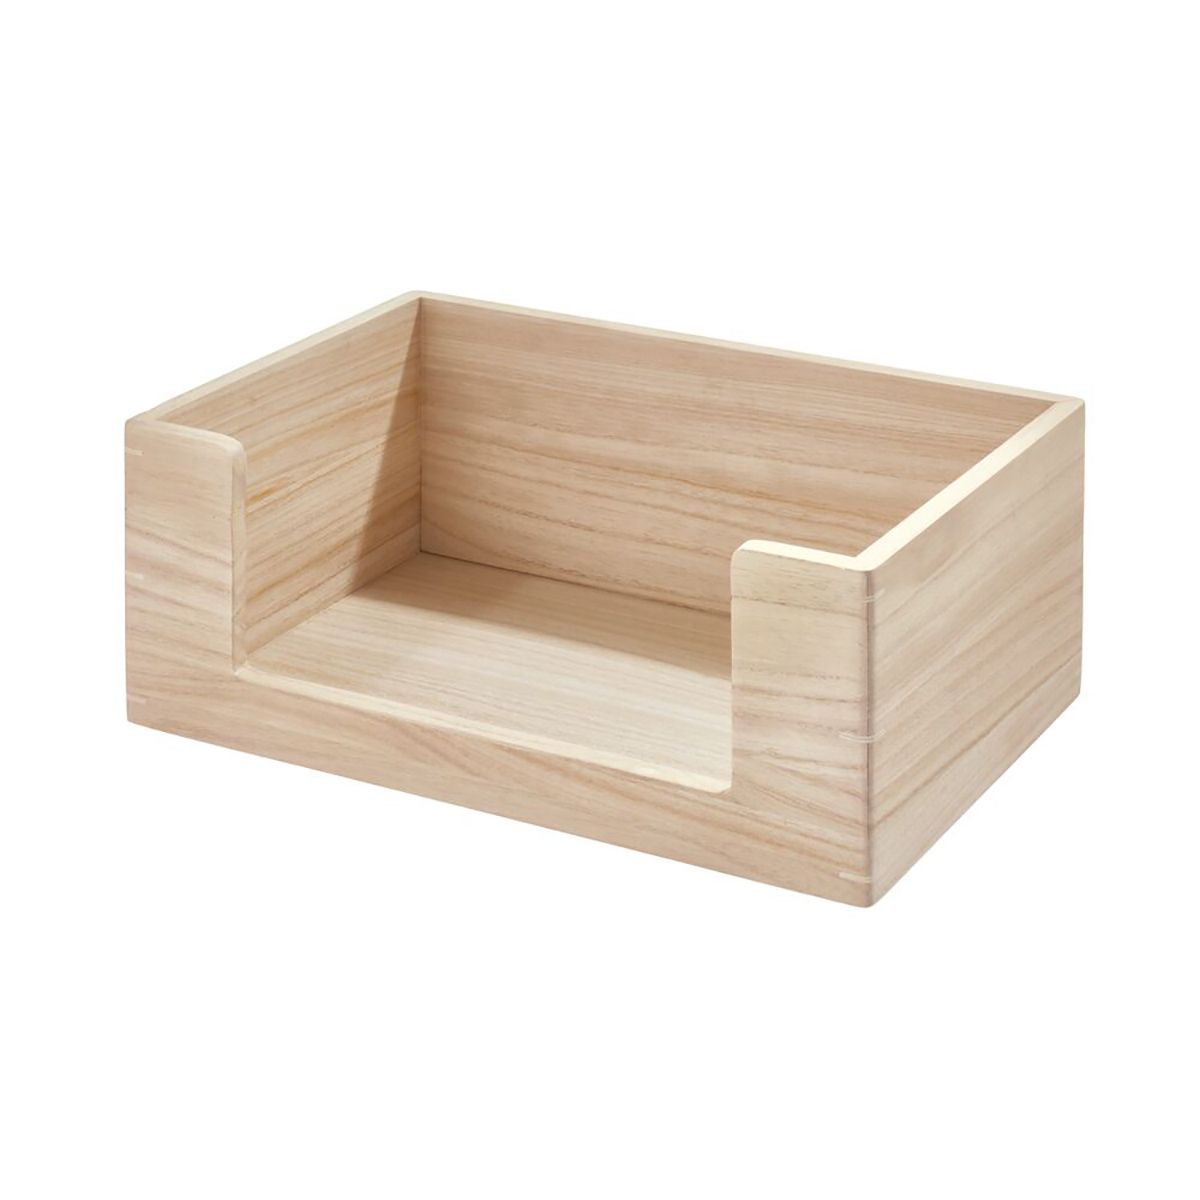 Large Wooden Open Front Bin | The Container Store